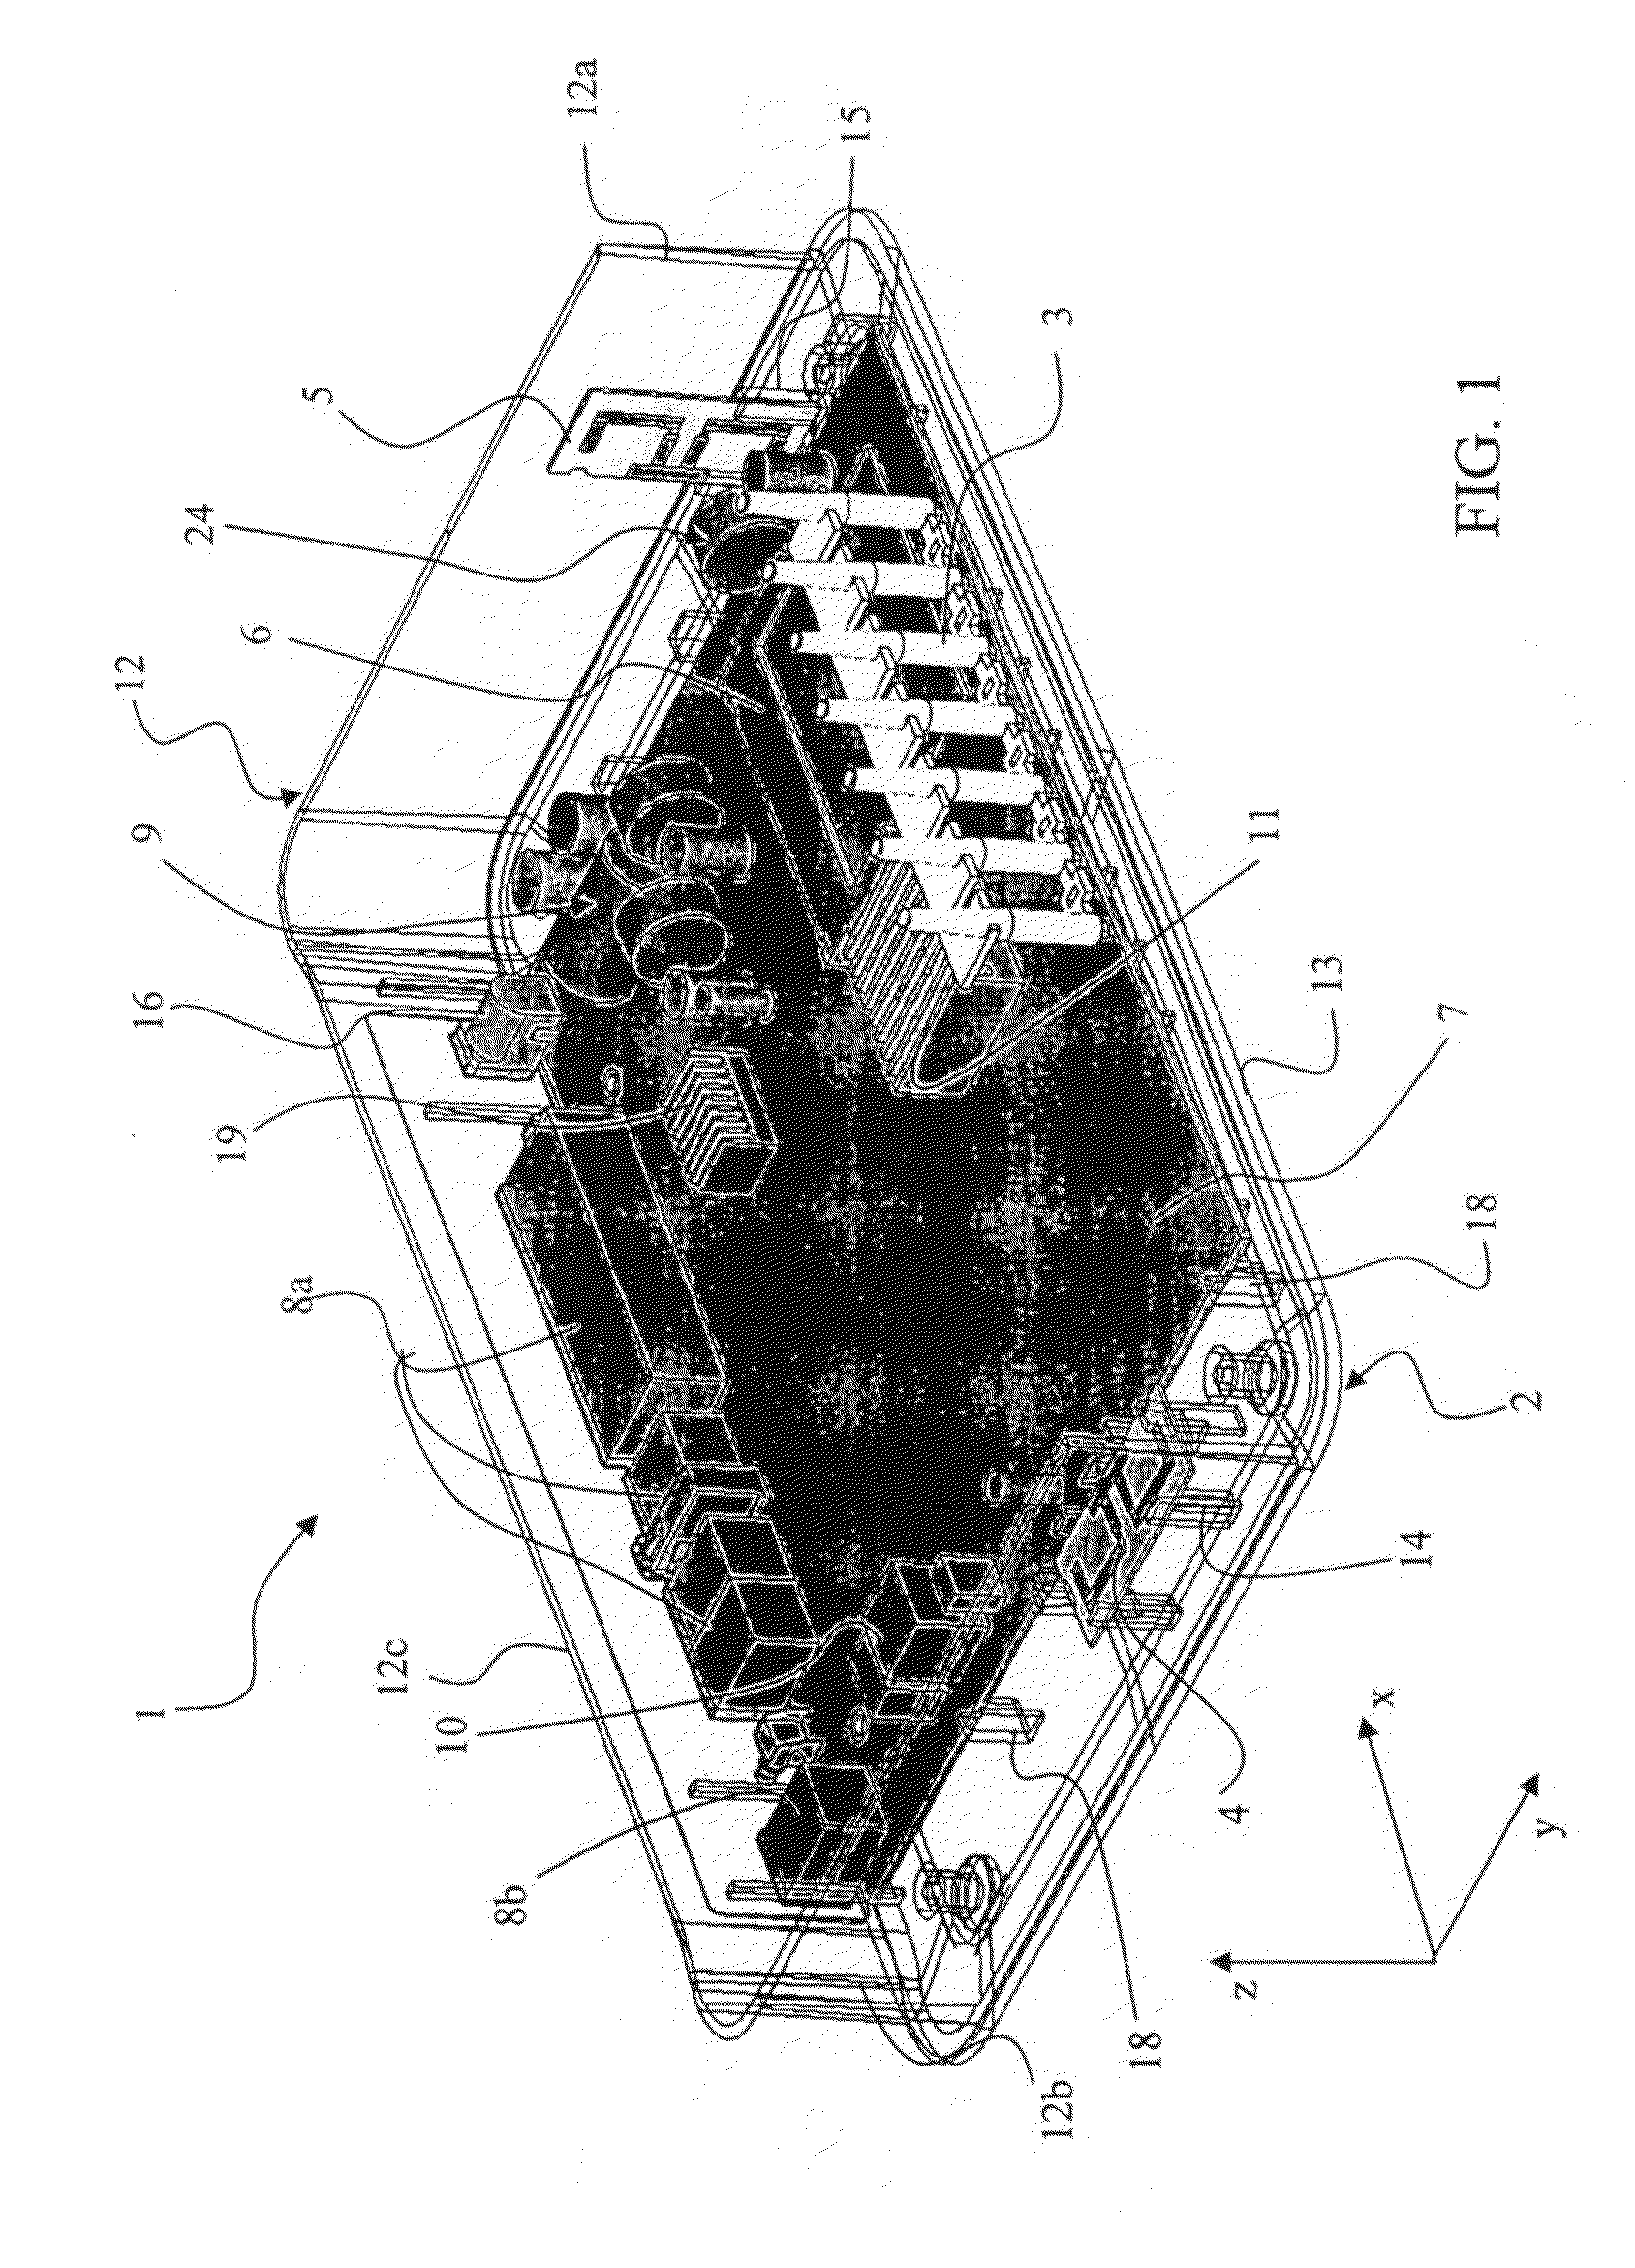 Wireless network device including a polarization and spatial diversity antenna system